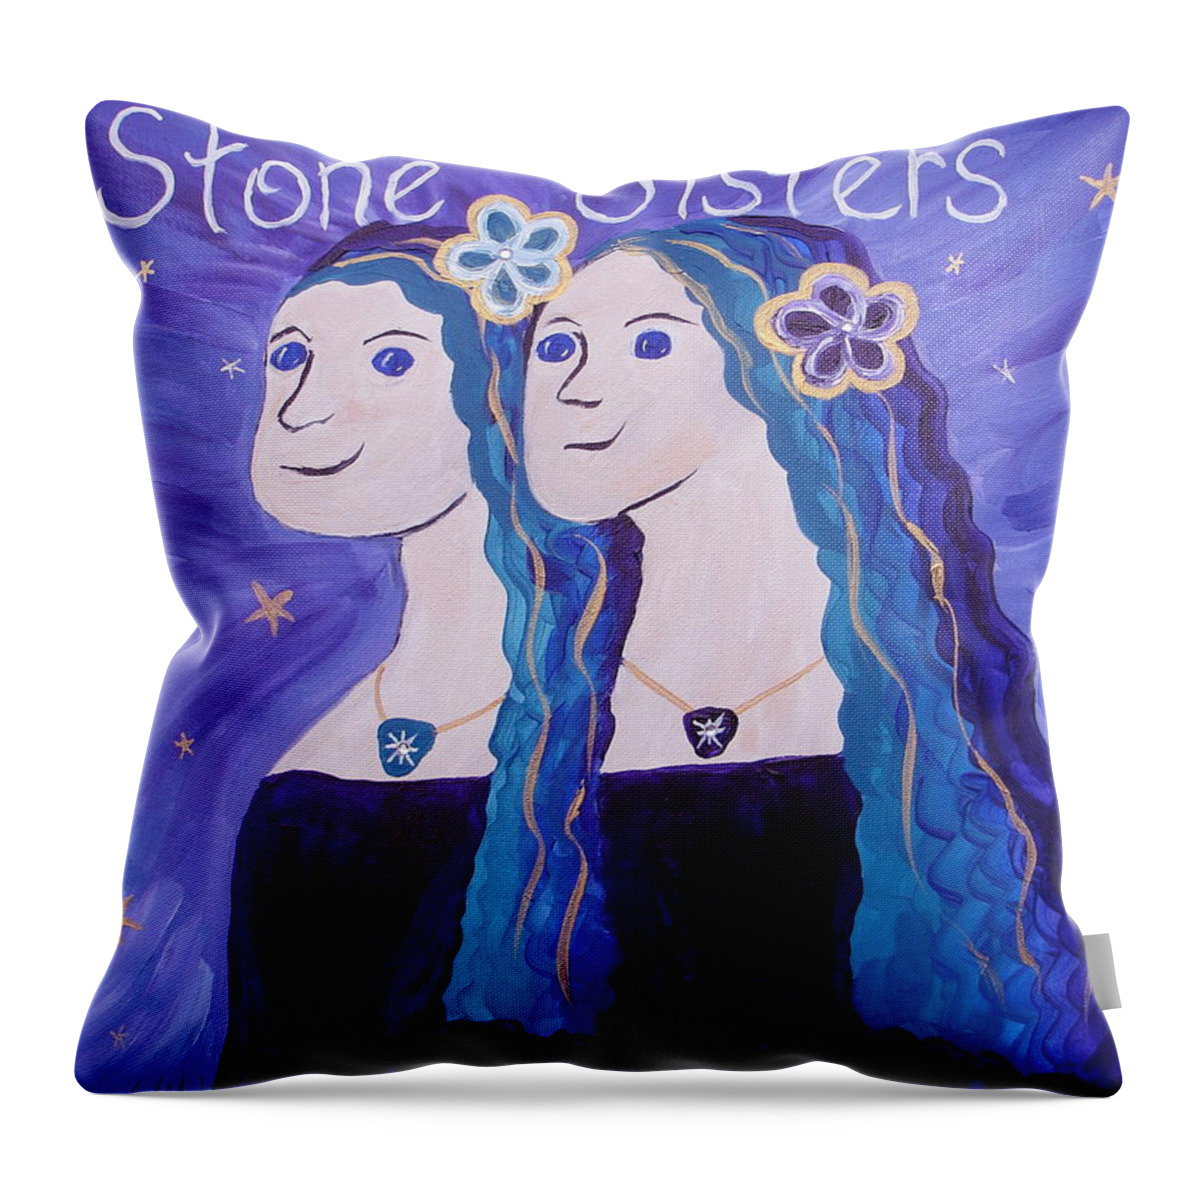 Stone Sisters Throw Pillow featuring the painting Stone Sisters by Angie Butler